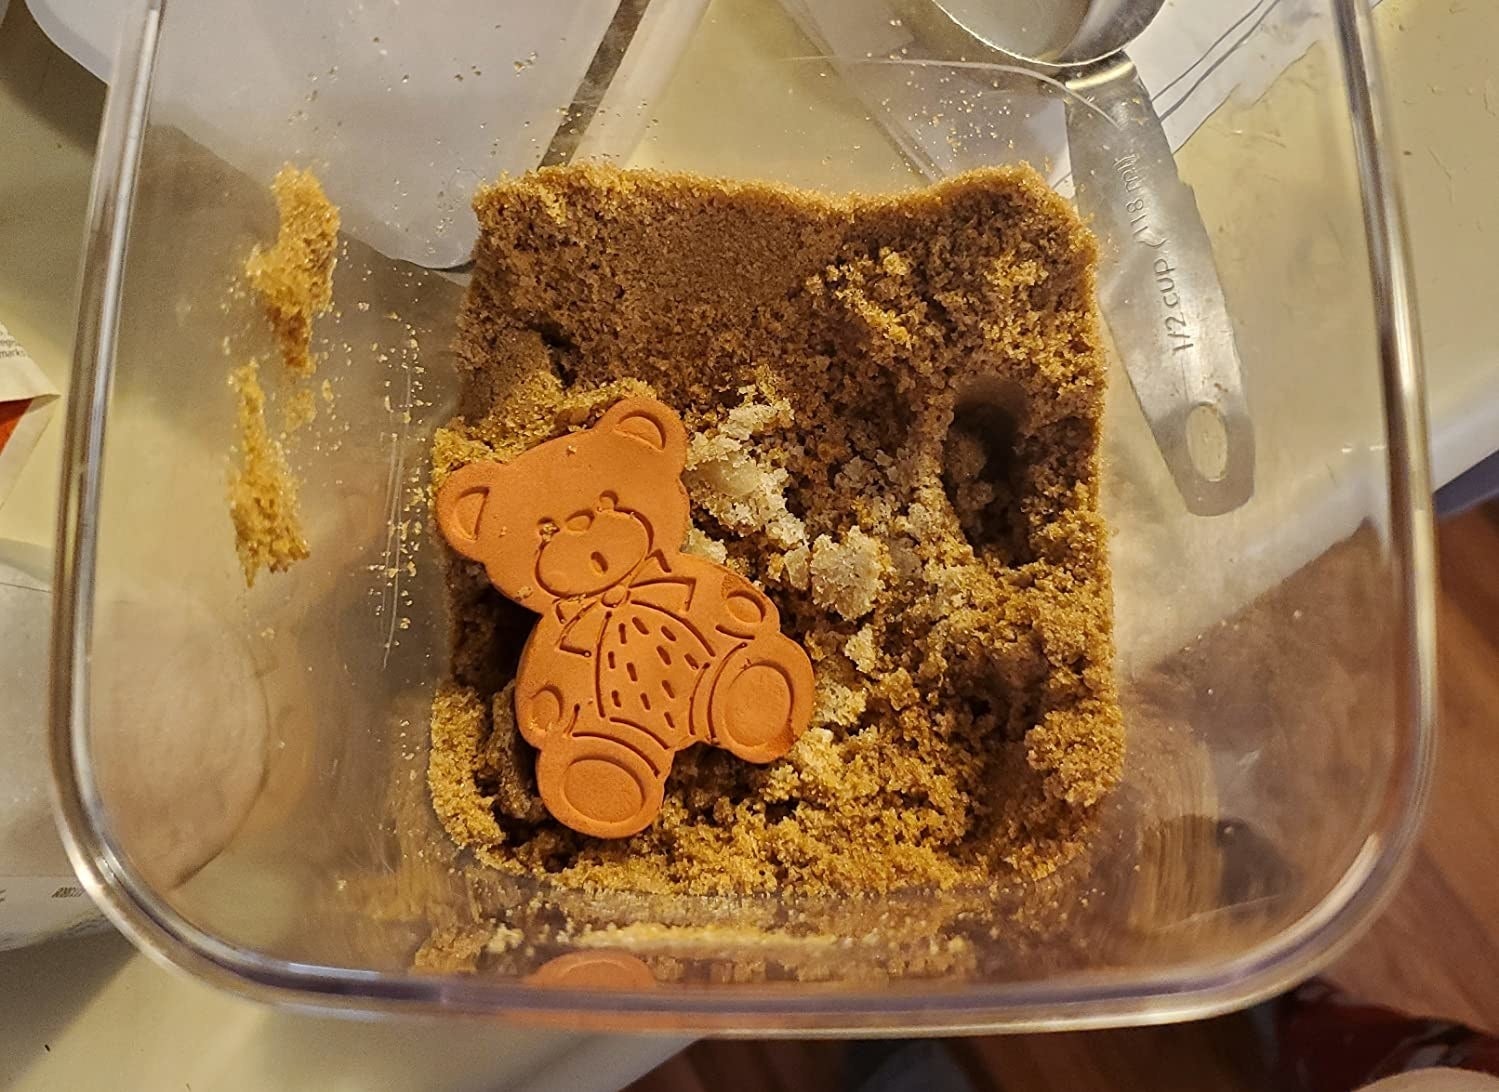 Reviewer image of bear-shaped softener in a container of brown sugar